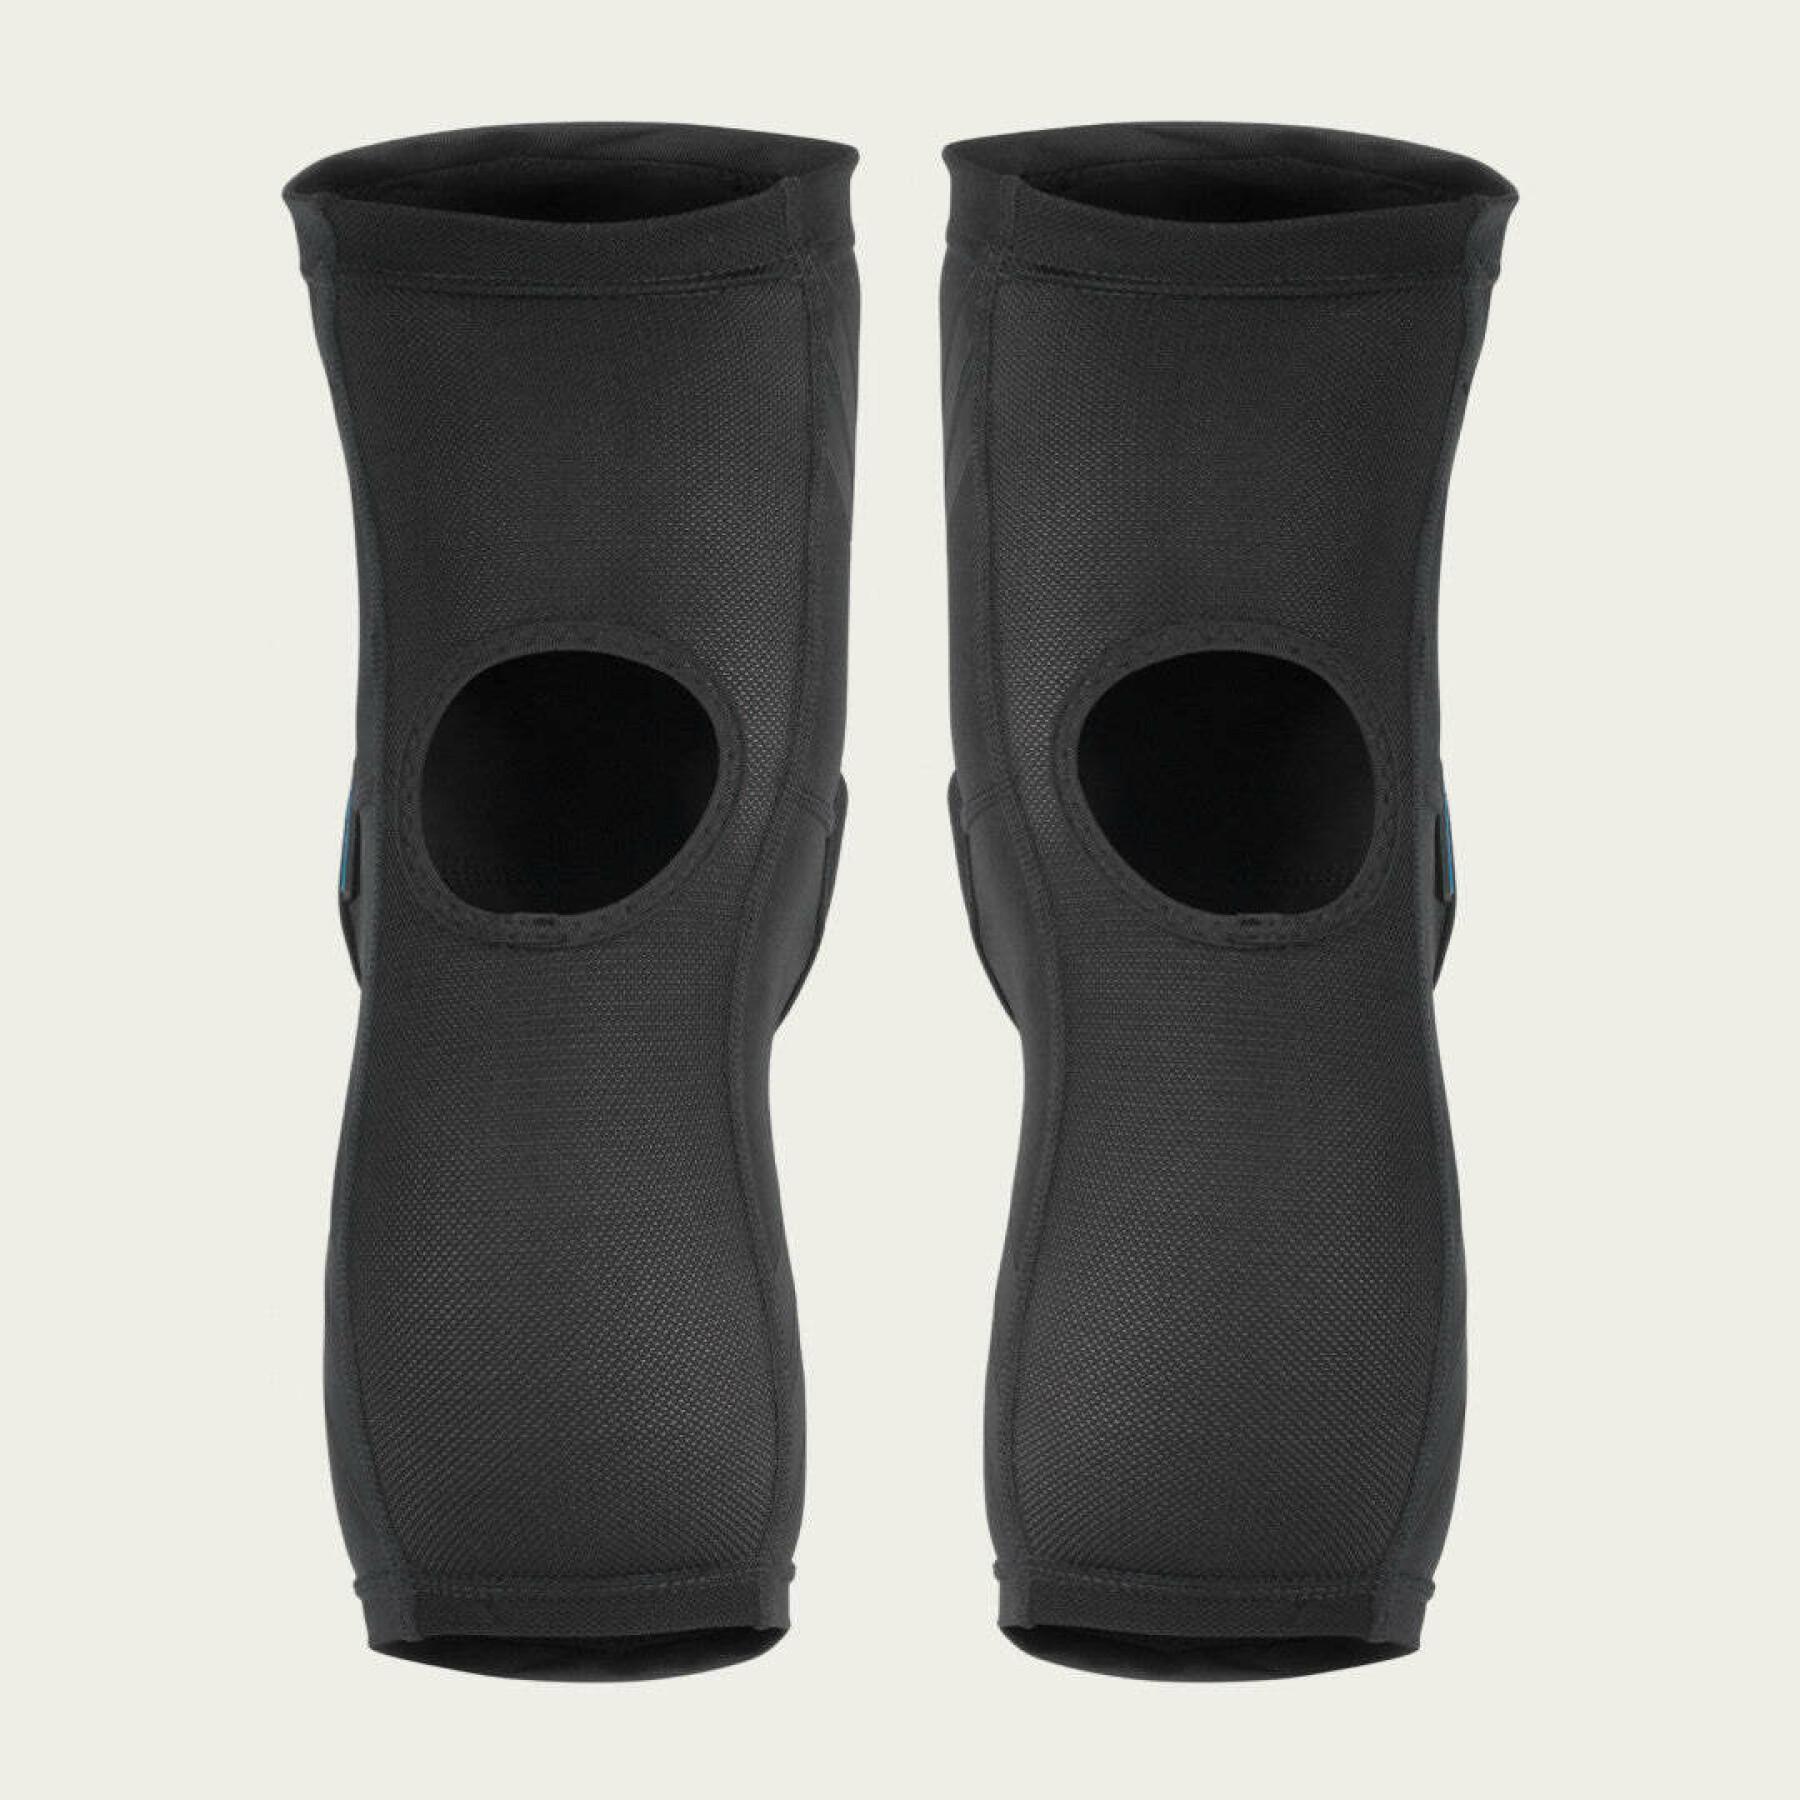 Knee protection for bicycles TSG Dermis A